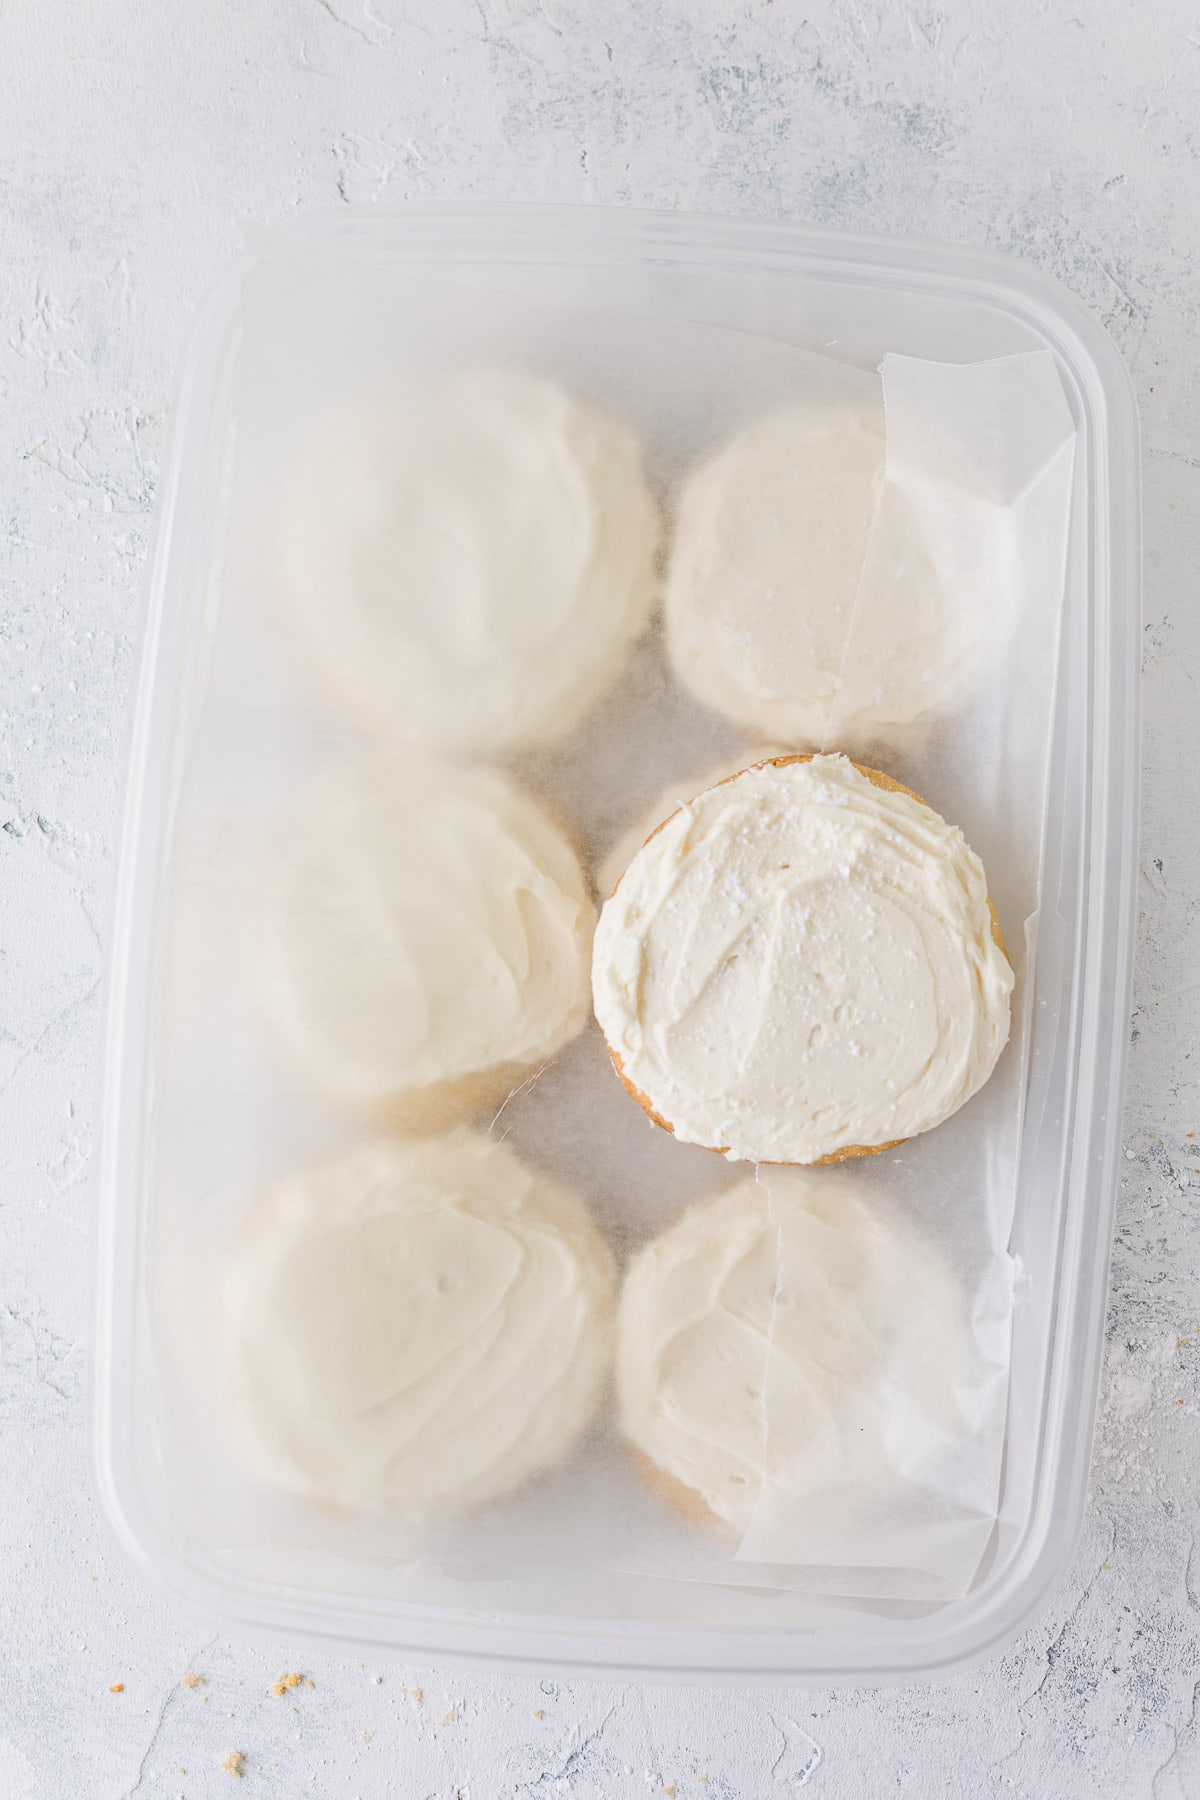 Frosted sugar cookies layered in a plastic storage box with lid removed.